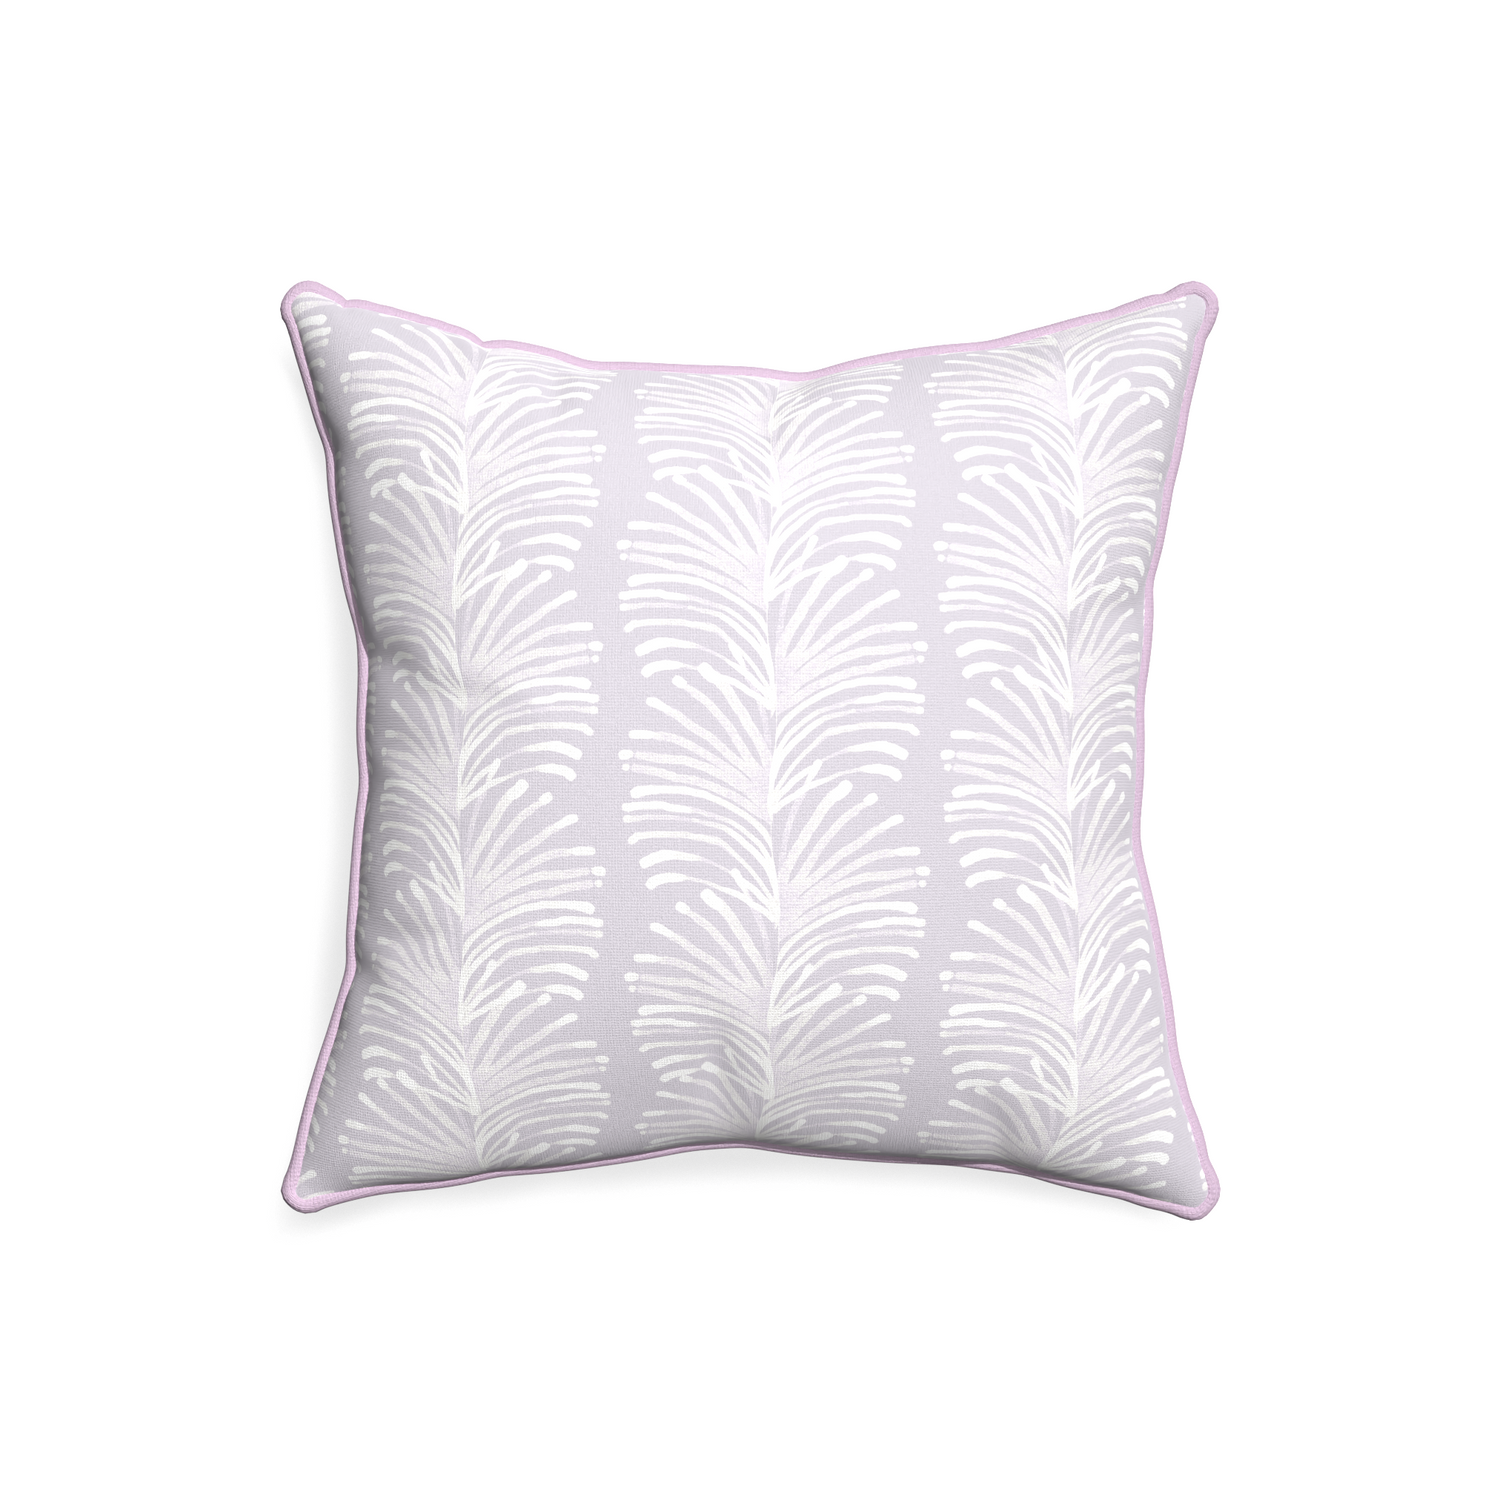 20-square emma lavender custom lavender botanical stripepillow with l piping on white background